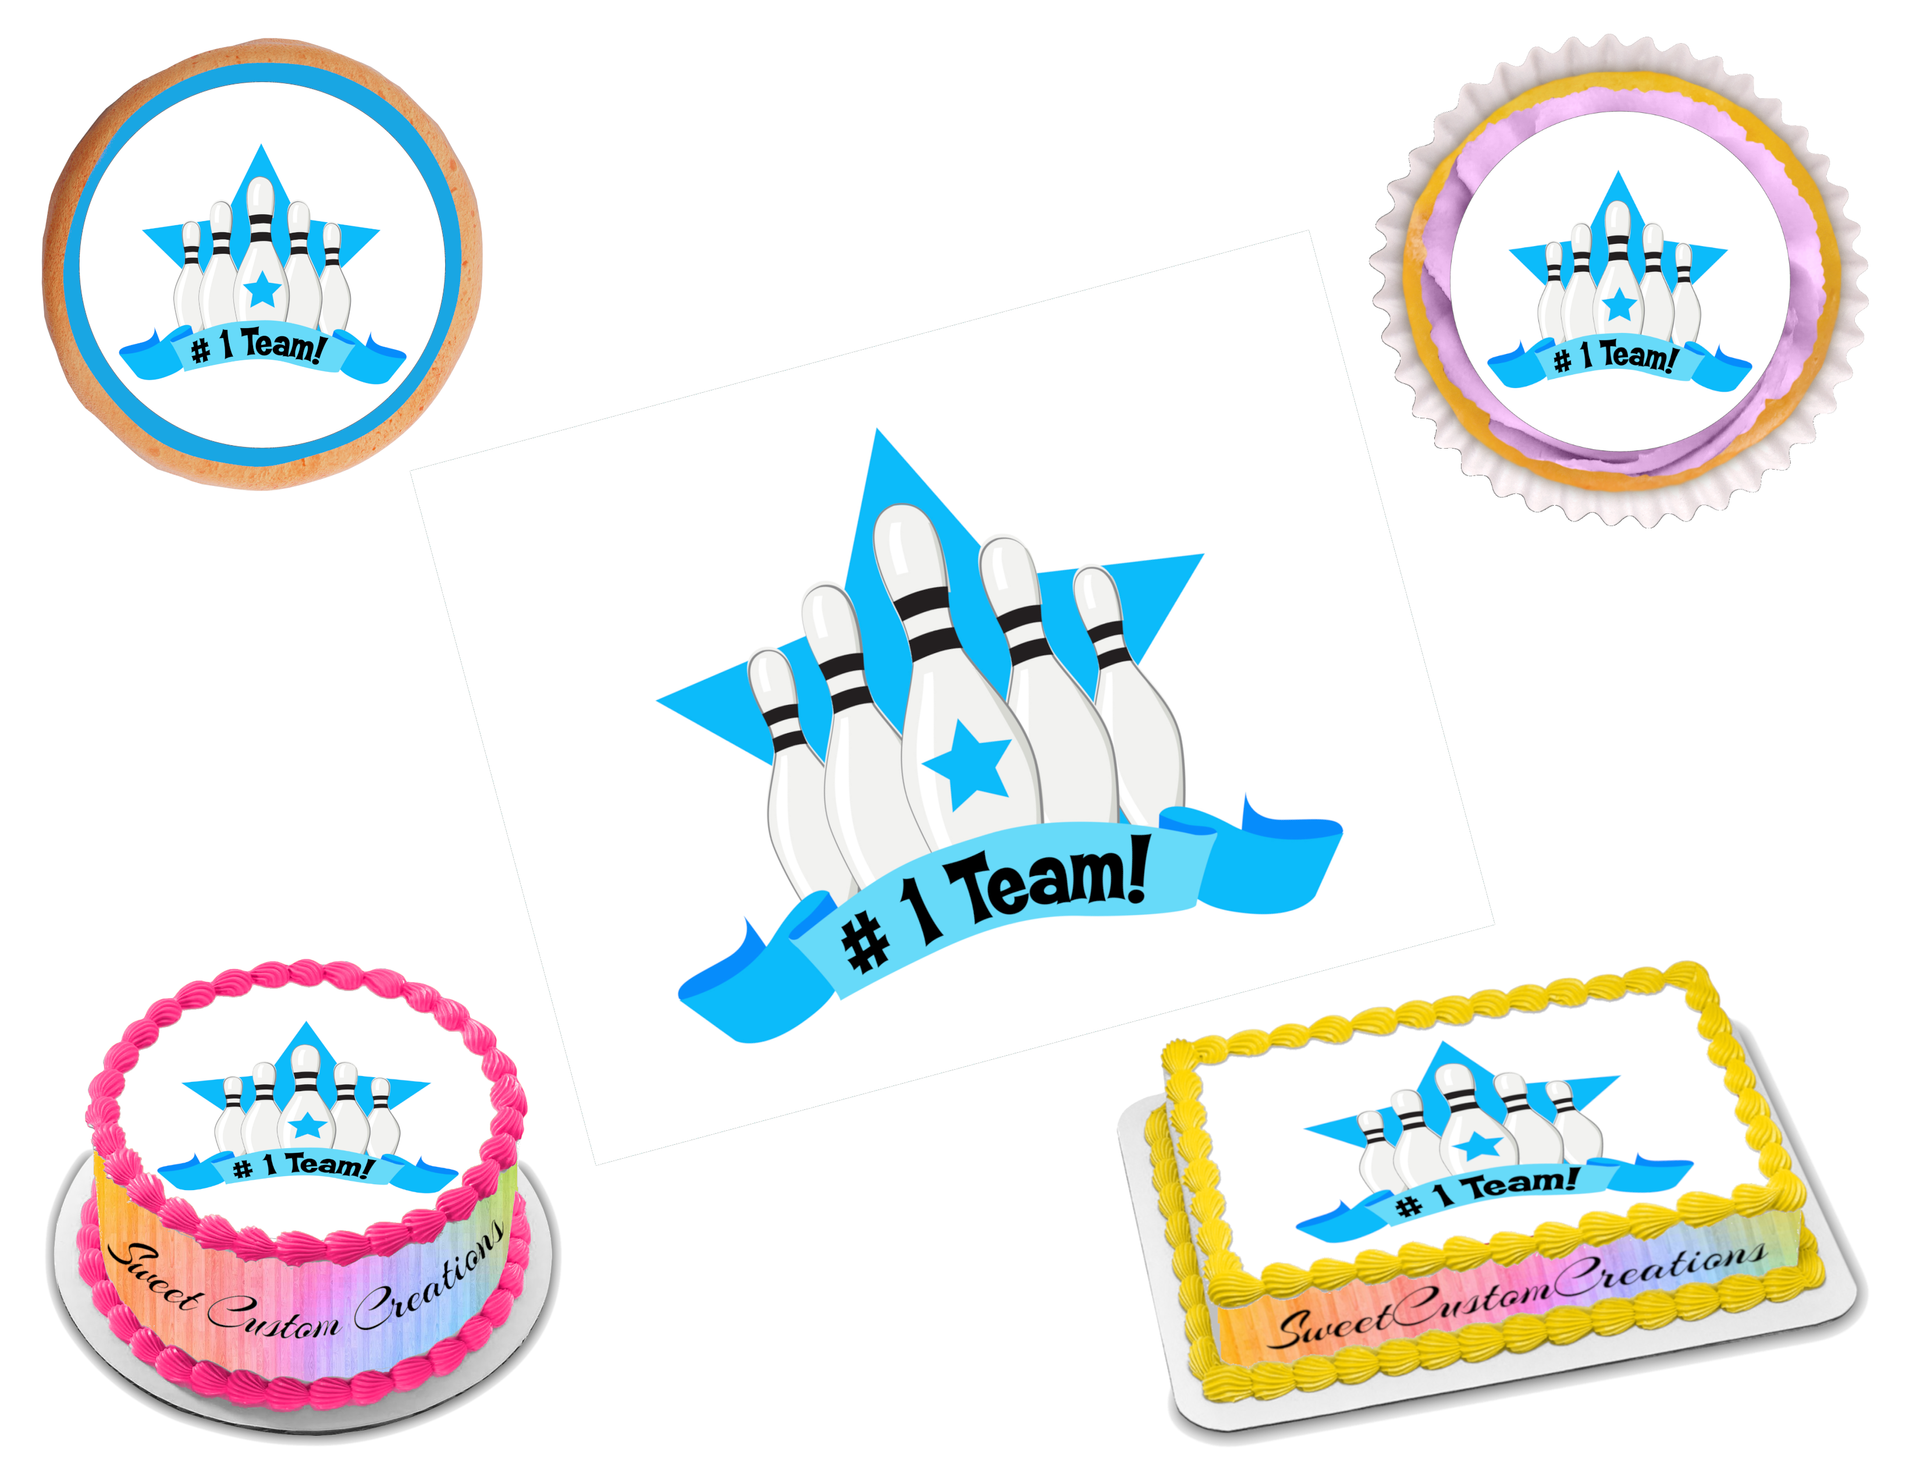 Bowling edible image frosting sheet topper sizes â sweet custom creations